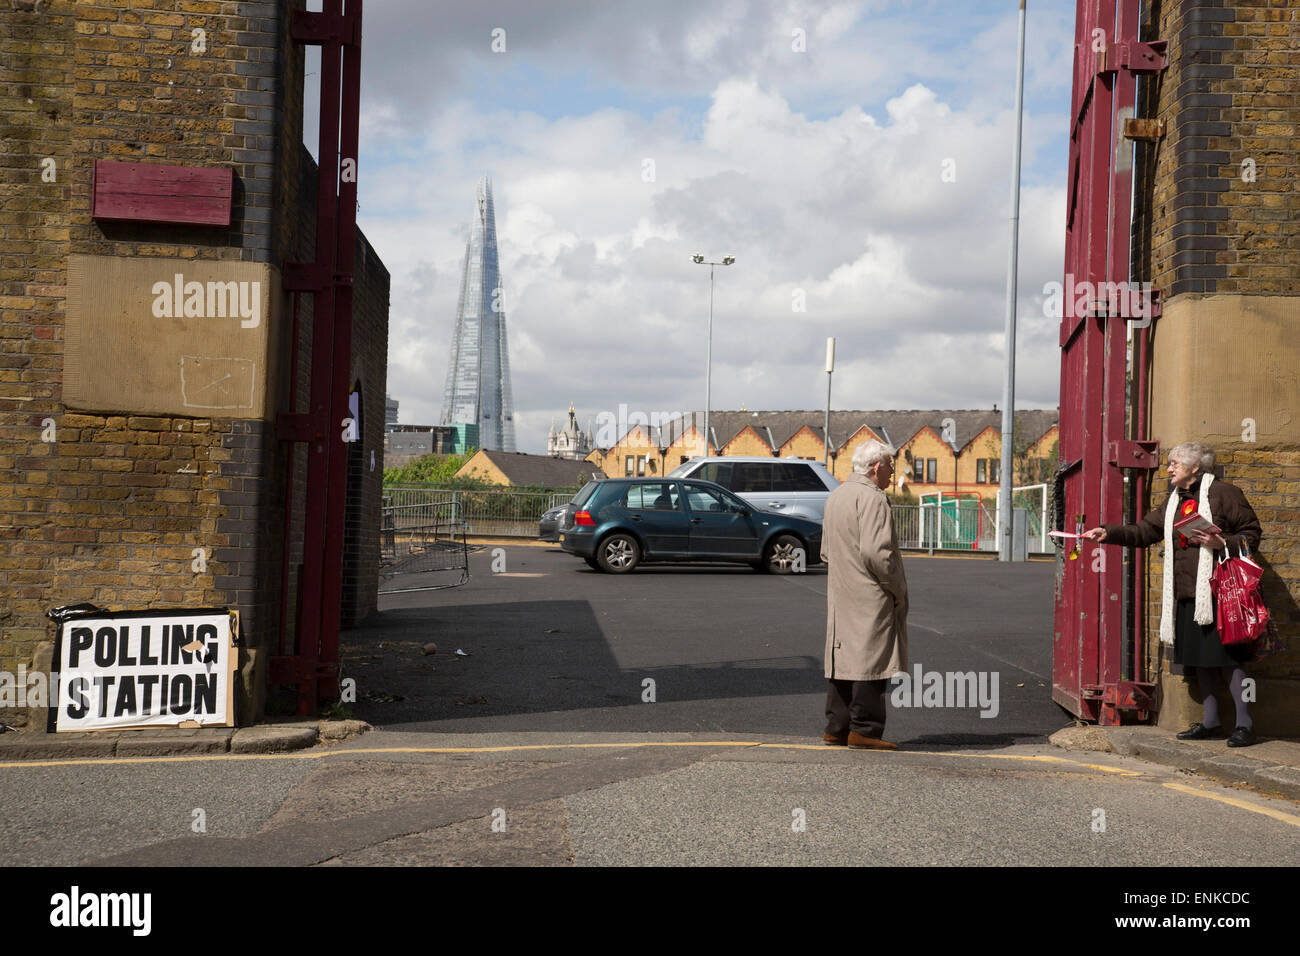 London, UK. 7th May, 2015. Voters attending a polling station at John Orwell Leisure Centre in the constituency of  Poplar and Limehouse in East London on the day of the general election. This is a Labour Party seat, although this electin is set to be one of the most hotly contested in a generation. Credit:  Michael Kemp/Alamy Live News Stock Photo